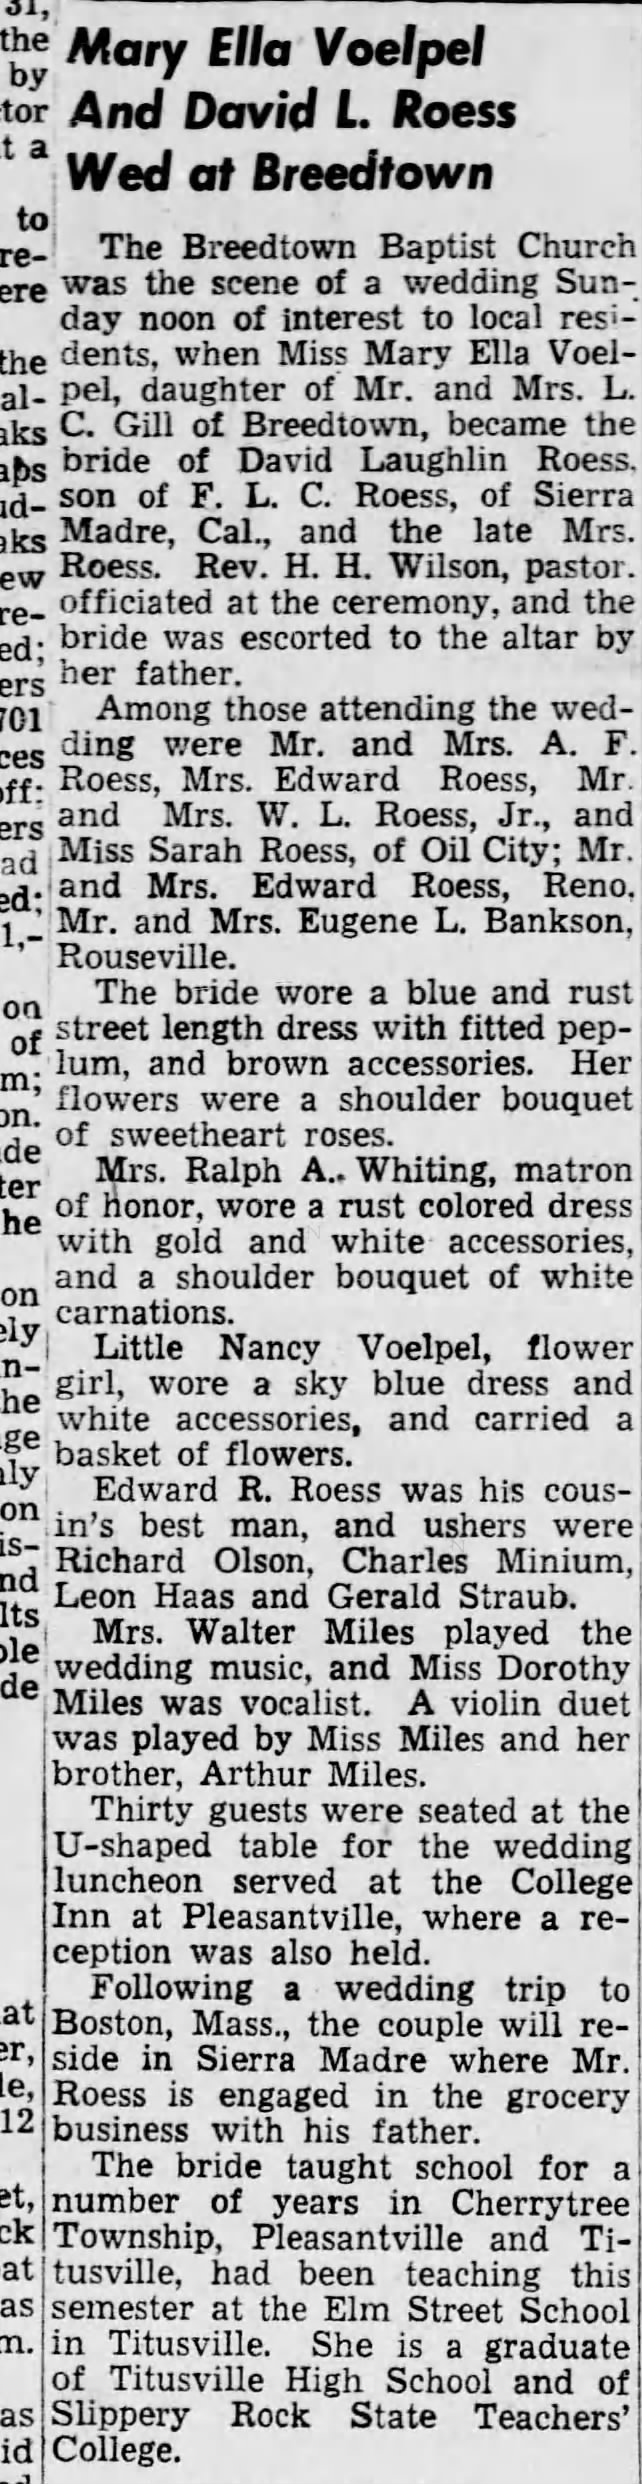 Roess-Voelpel Wed 23 Jan 1949, The News-Herald, Franklin, PA, pg 9